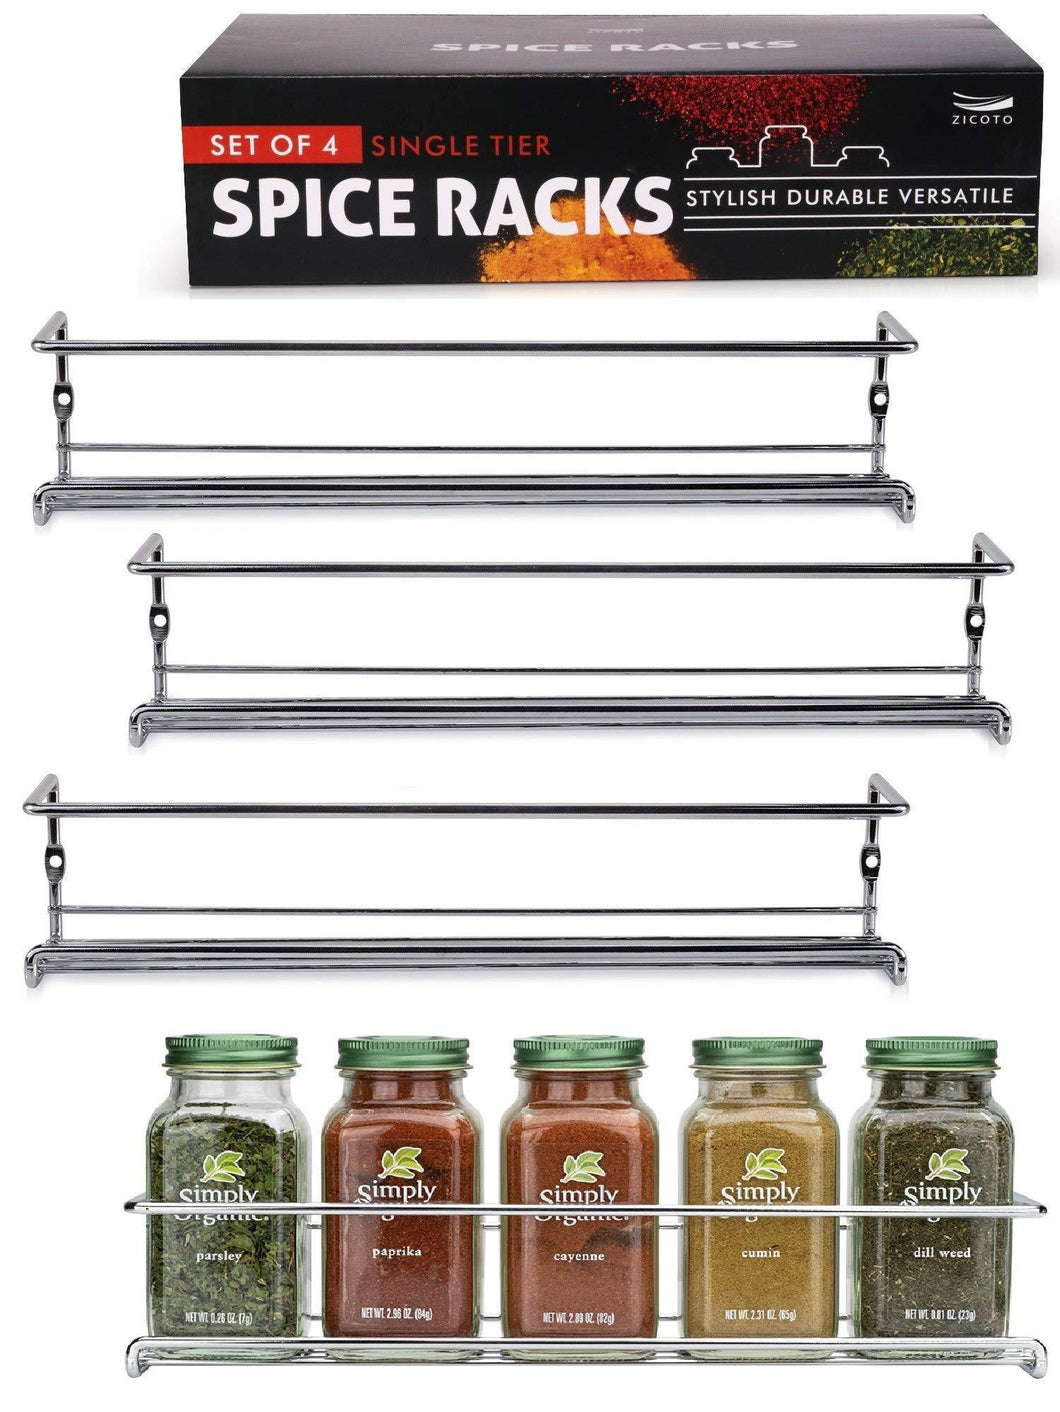 Gorgeous Spice Rack Organizer for Cabinets or Wall Mounts - Space Saving Set of 4 Hanging Racks - Perfect Seasoning Organizer For Your Kitchen Cabinet, Cupboard or Pantry Door - Productive Organizing